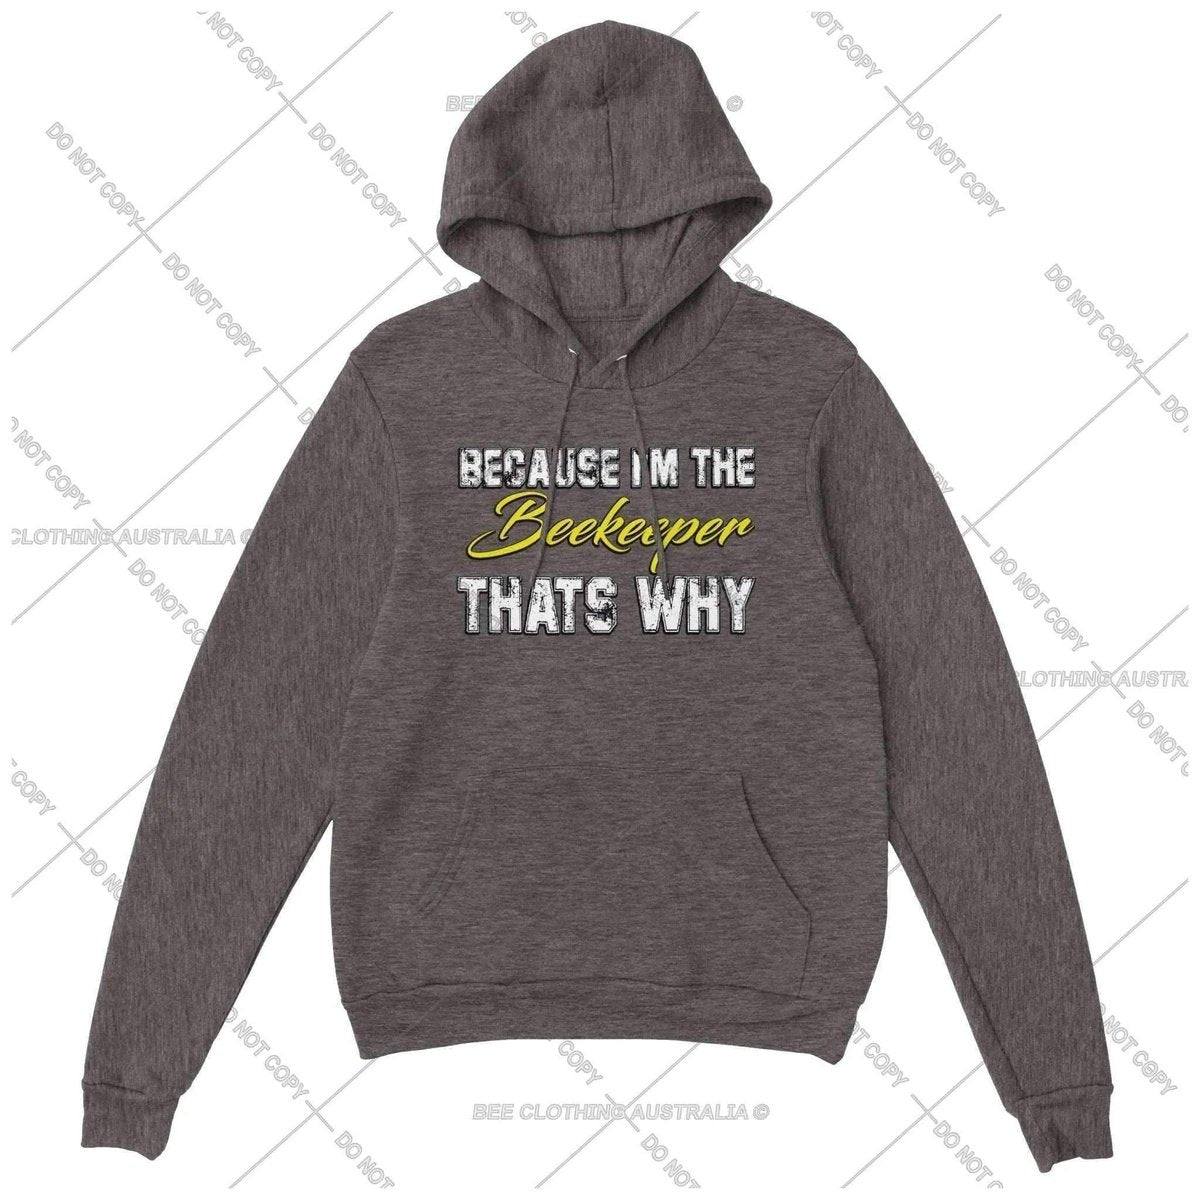 Because I'm the beekeeper that's why Hoodie - Premium Unisex Pullover Hoodie Australia Online Color Charcoal Heather / XS